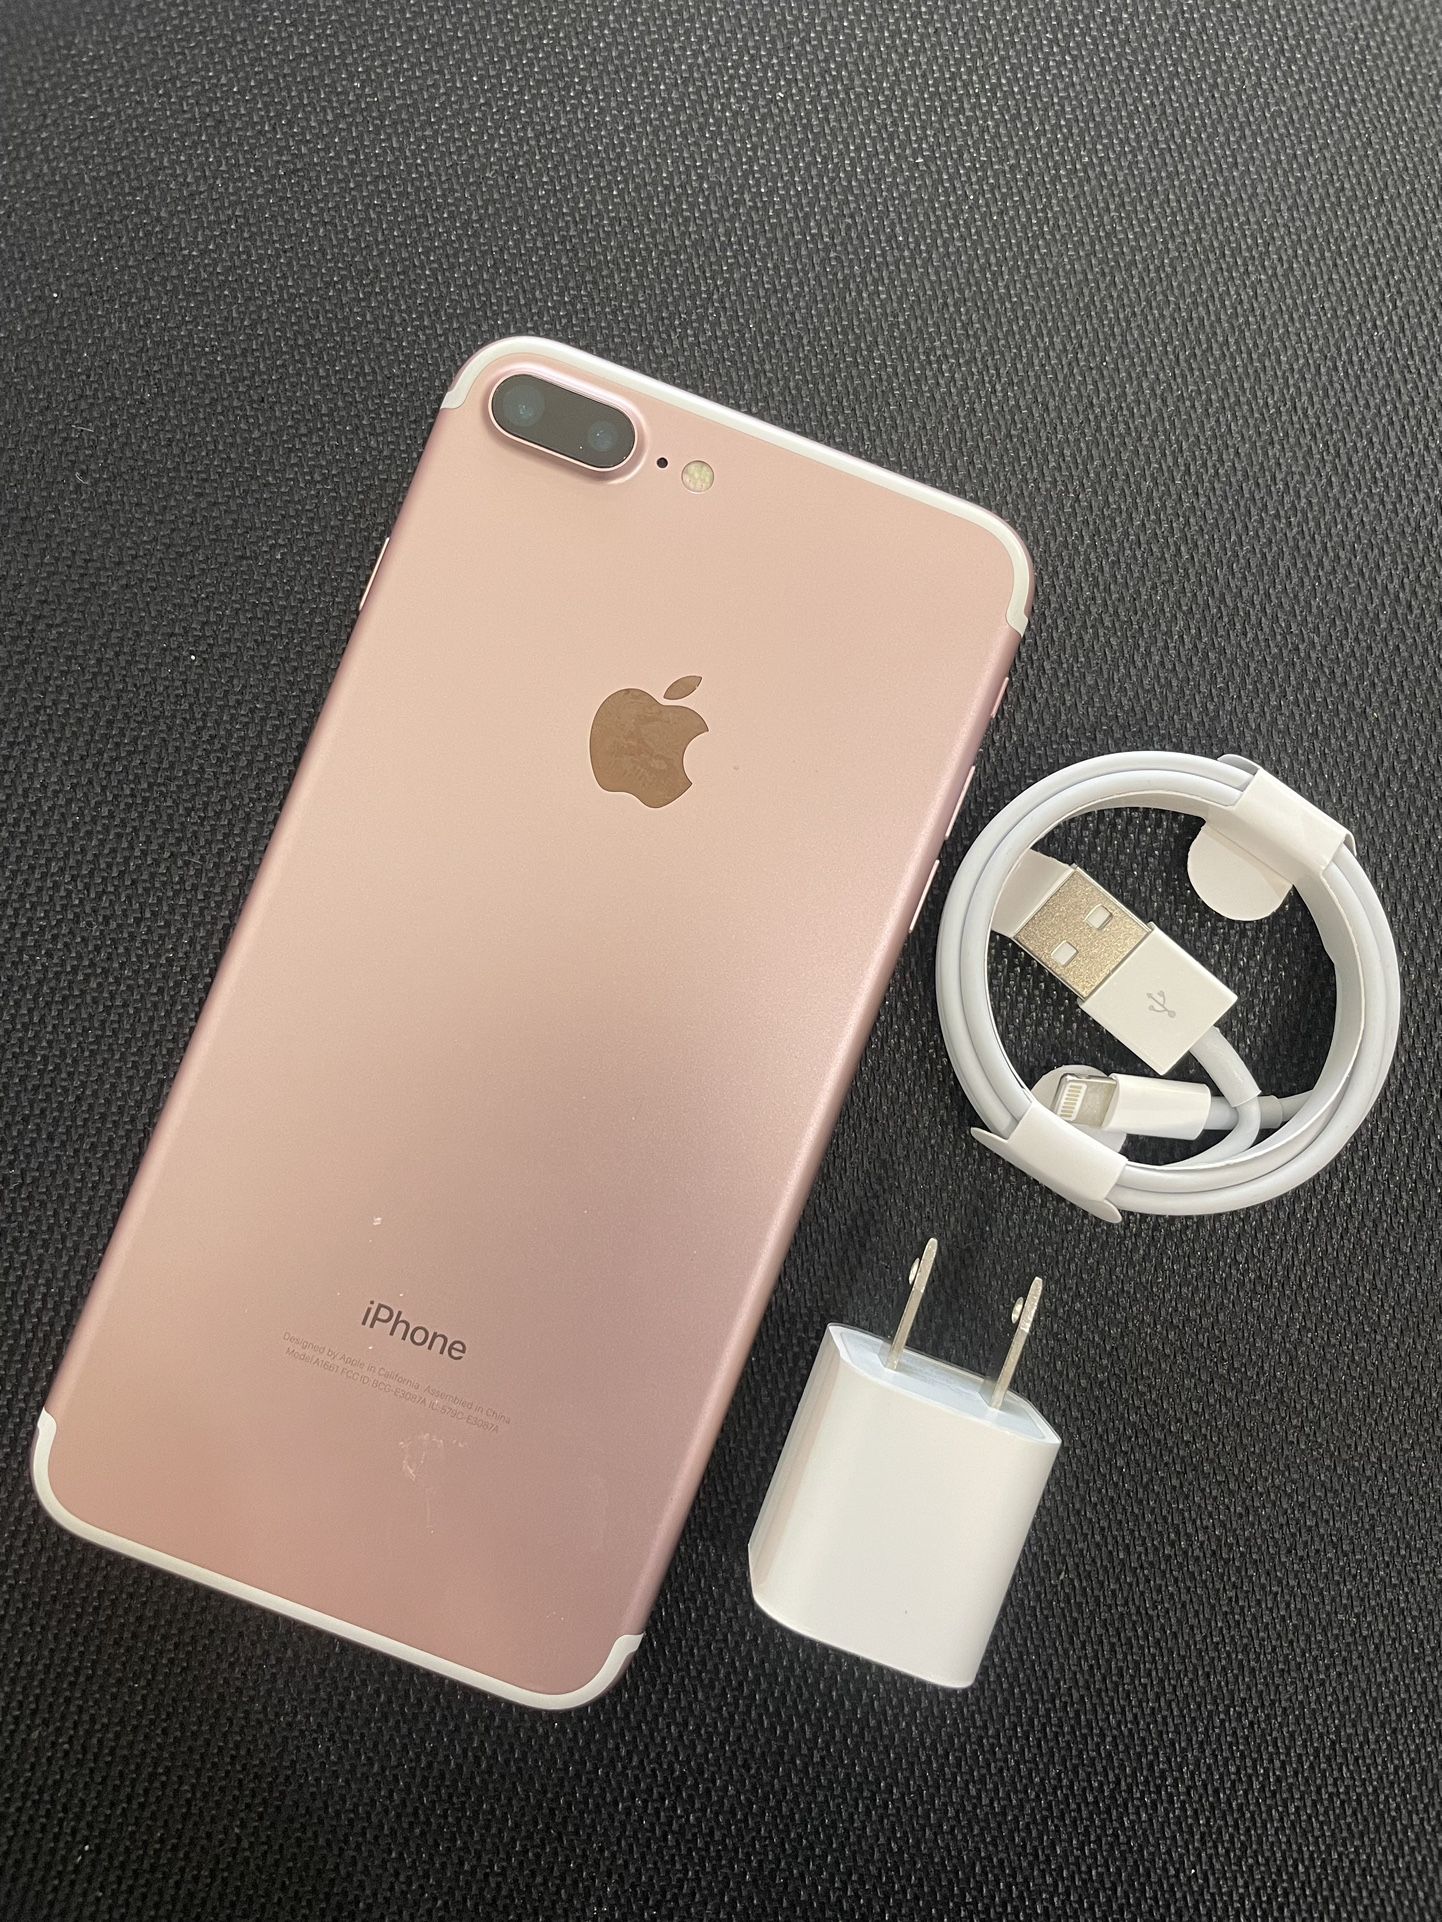 Factory Unlocked Apple iPhone 7 Plus 32gb, sold with warranty 